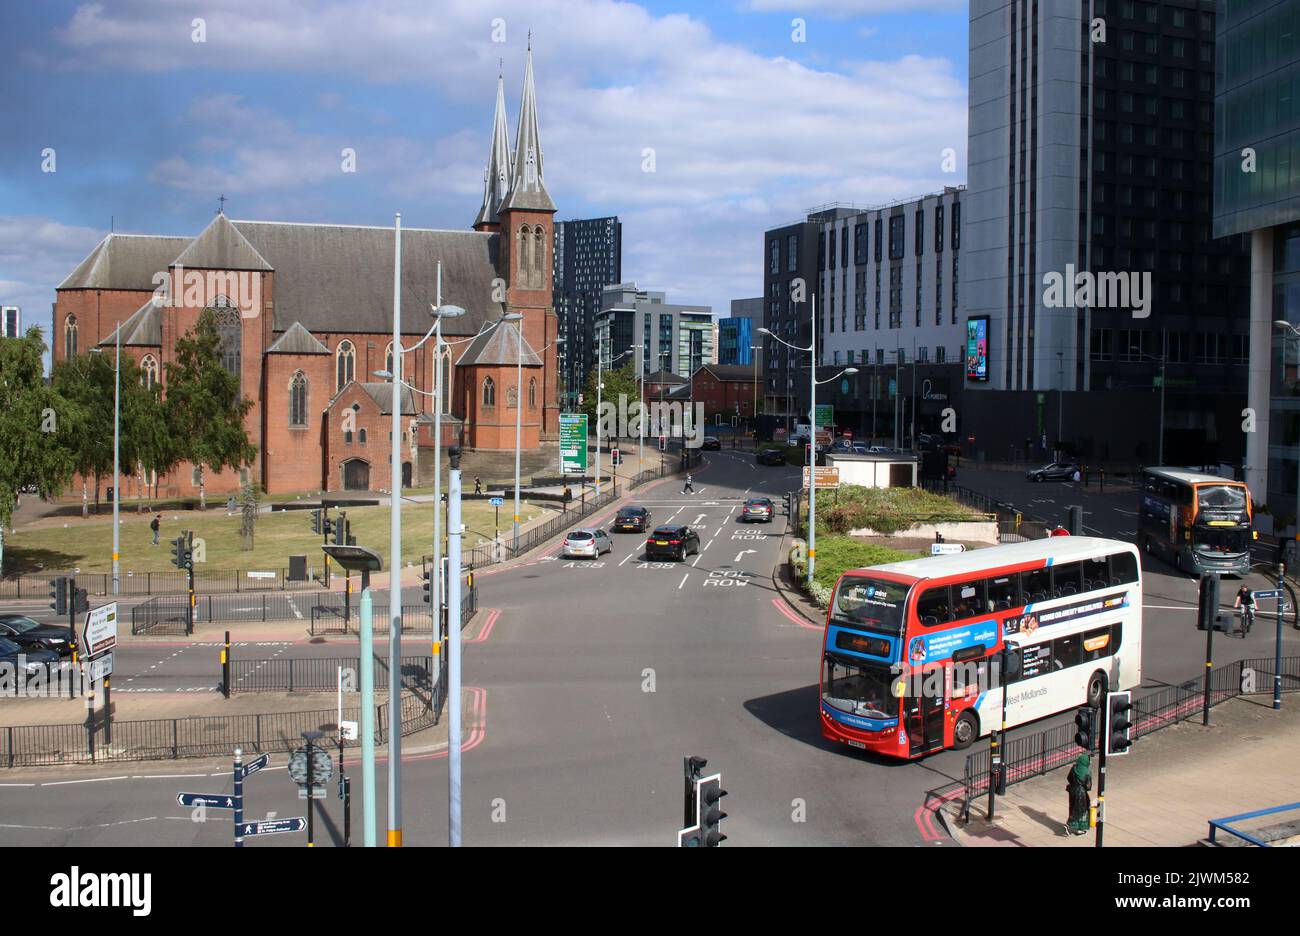 Metropolitan Cathedral Church and Basilica of Saint Chad, Catholic cathedral in Birmingham with buses and traffic on St Chad's Queensway, Birmingham. Stock Photo